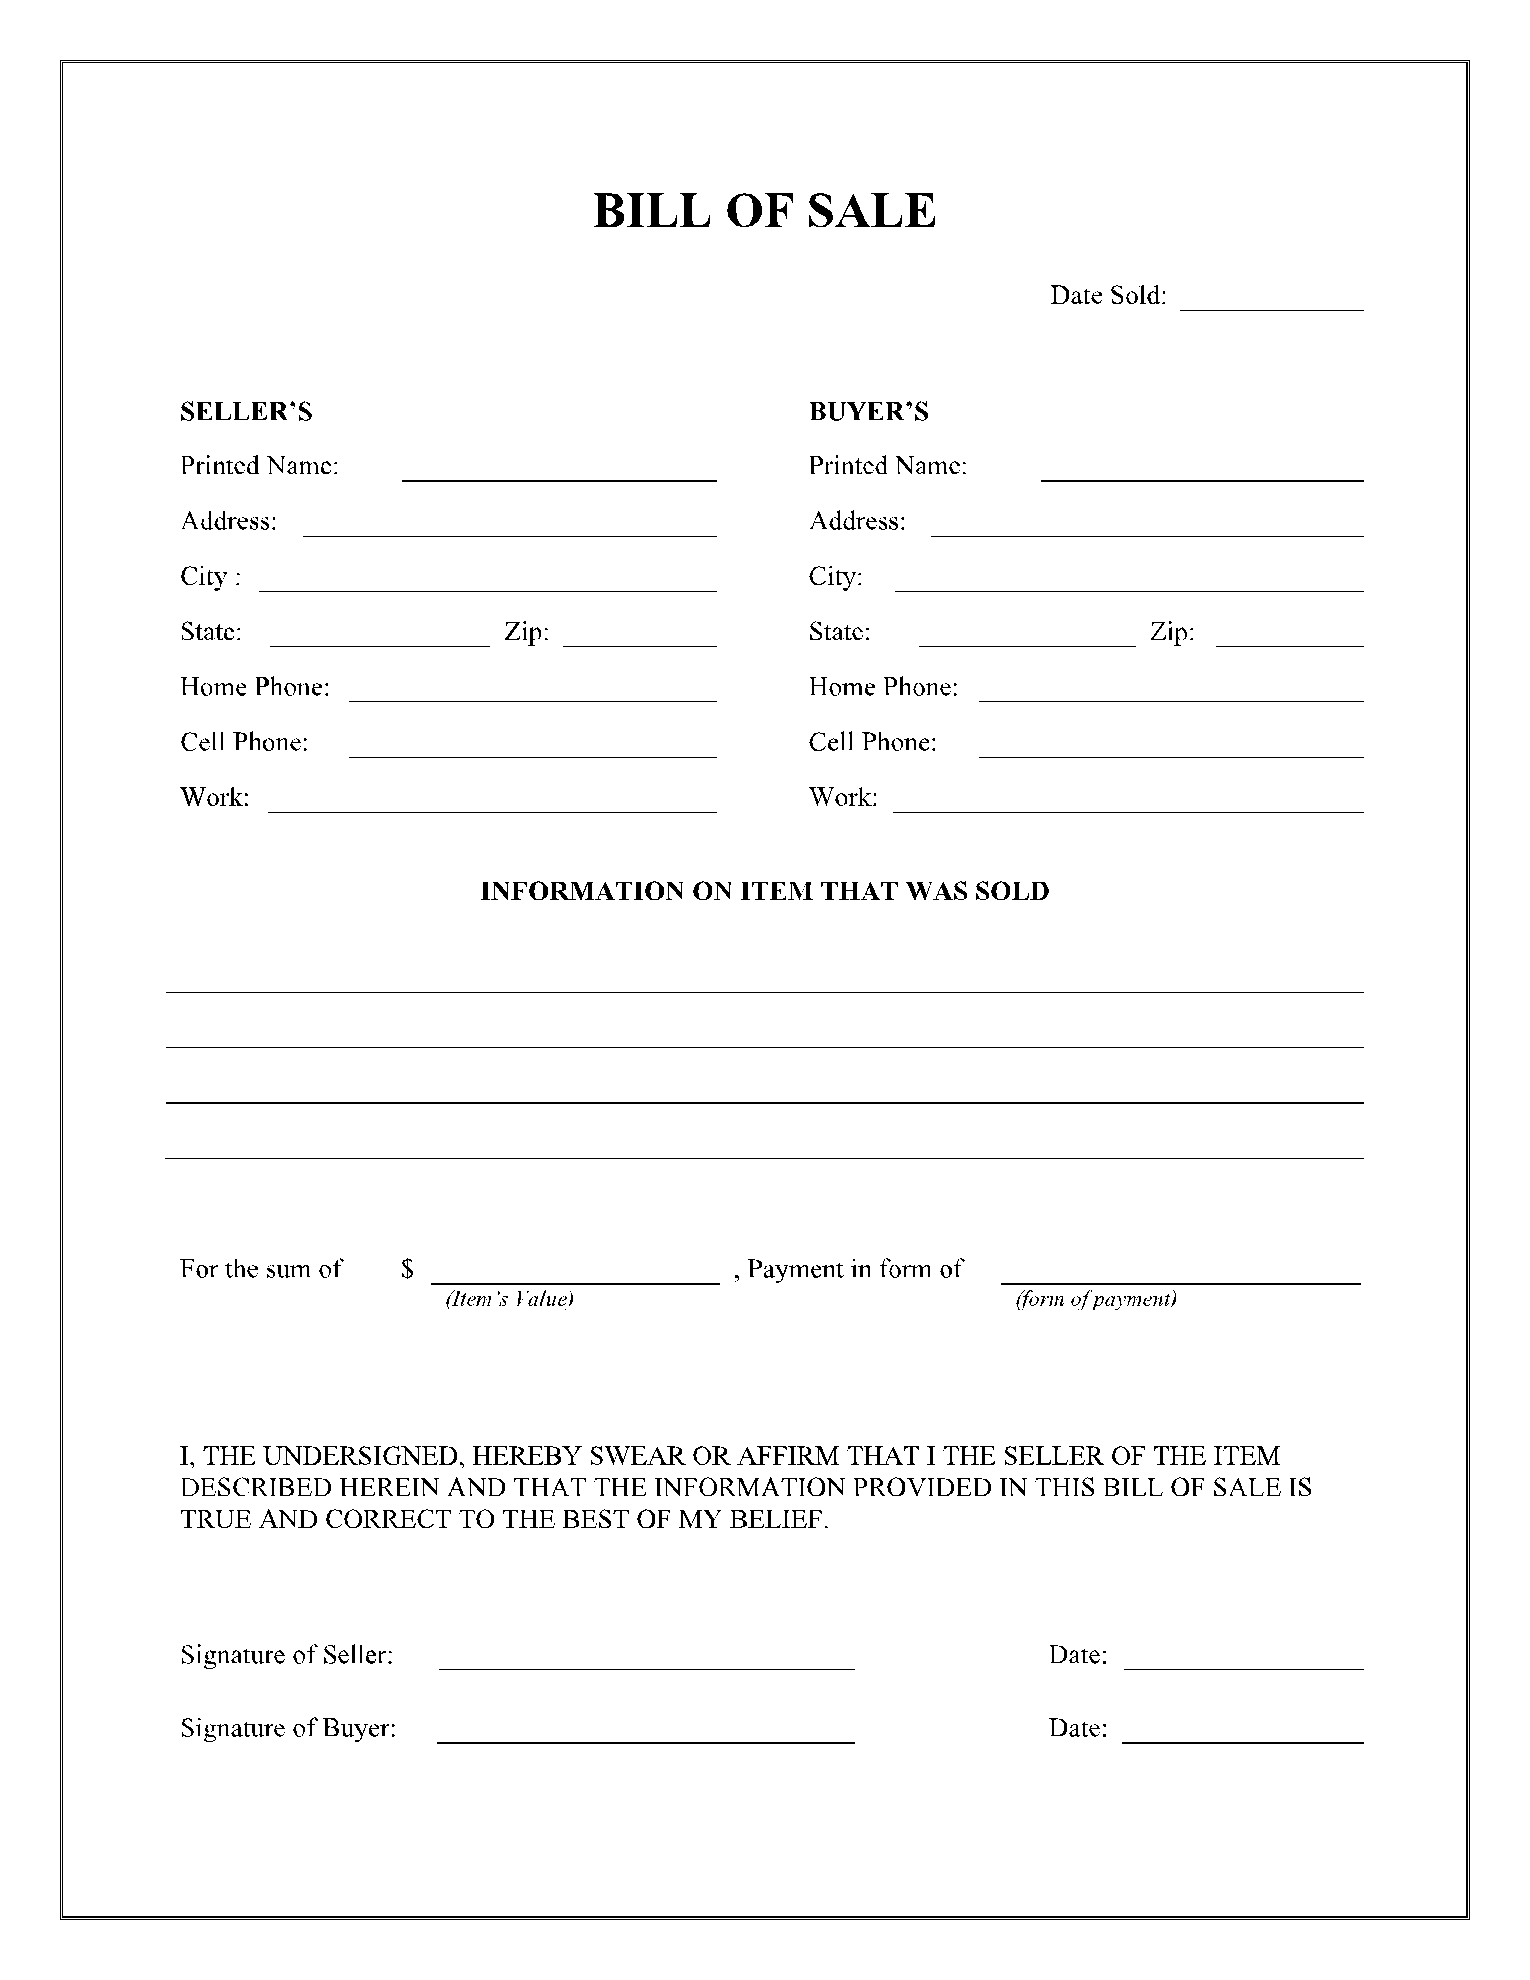 General Bill Of Sale Template 100 Free CocoSign - Free Printable Bill of Sale Form